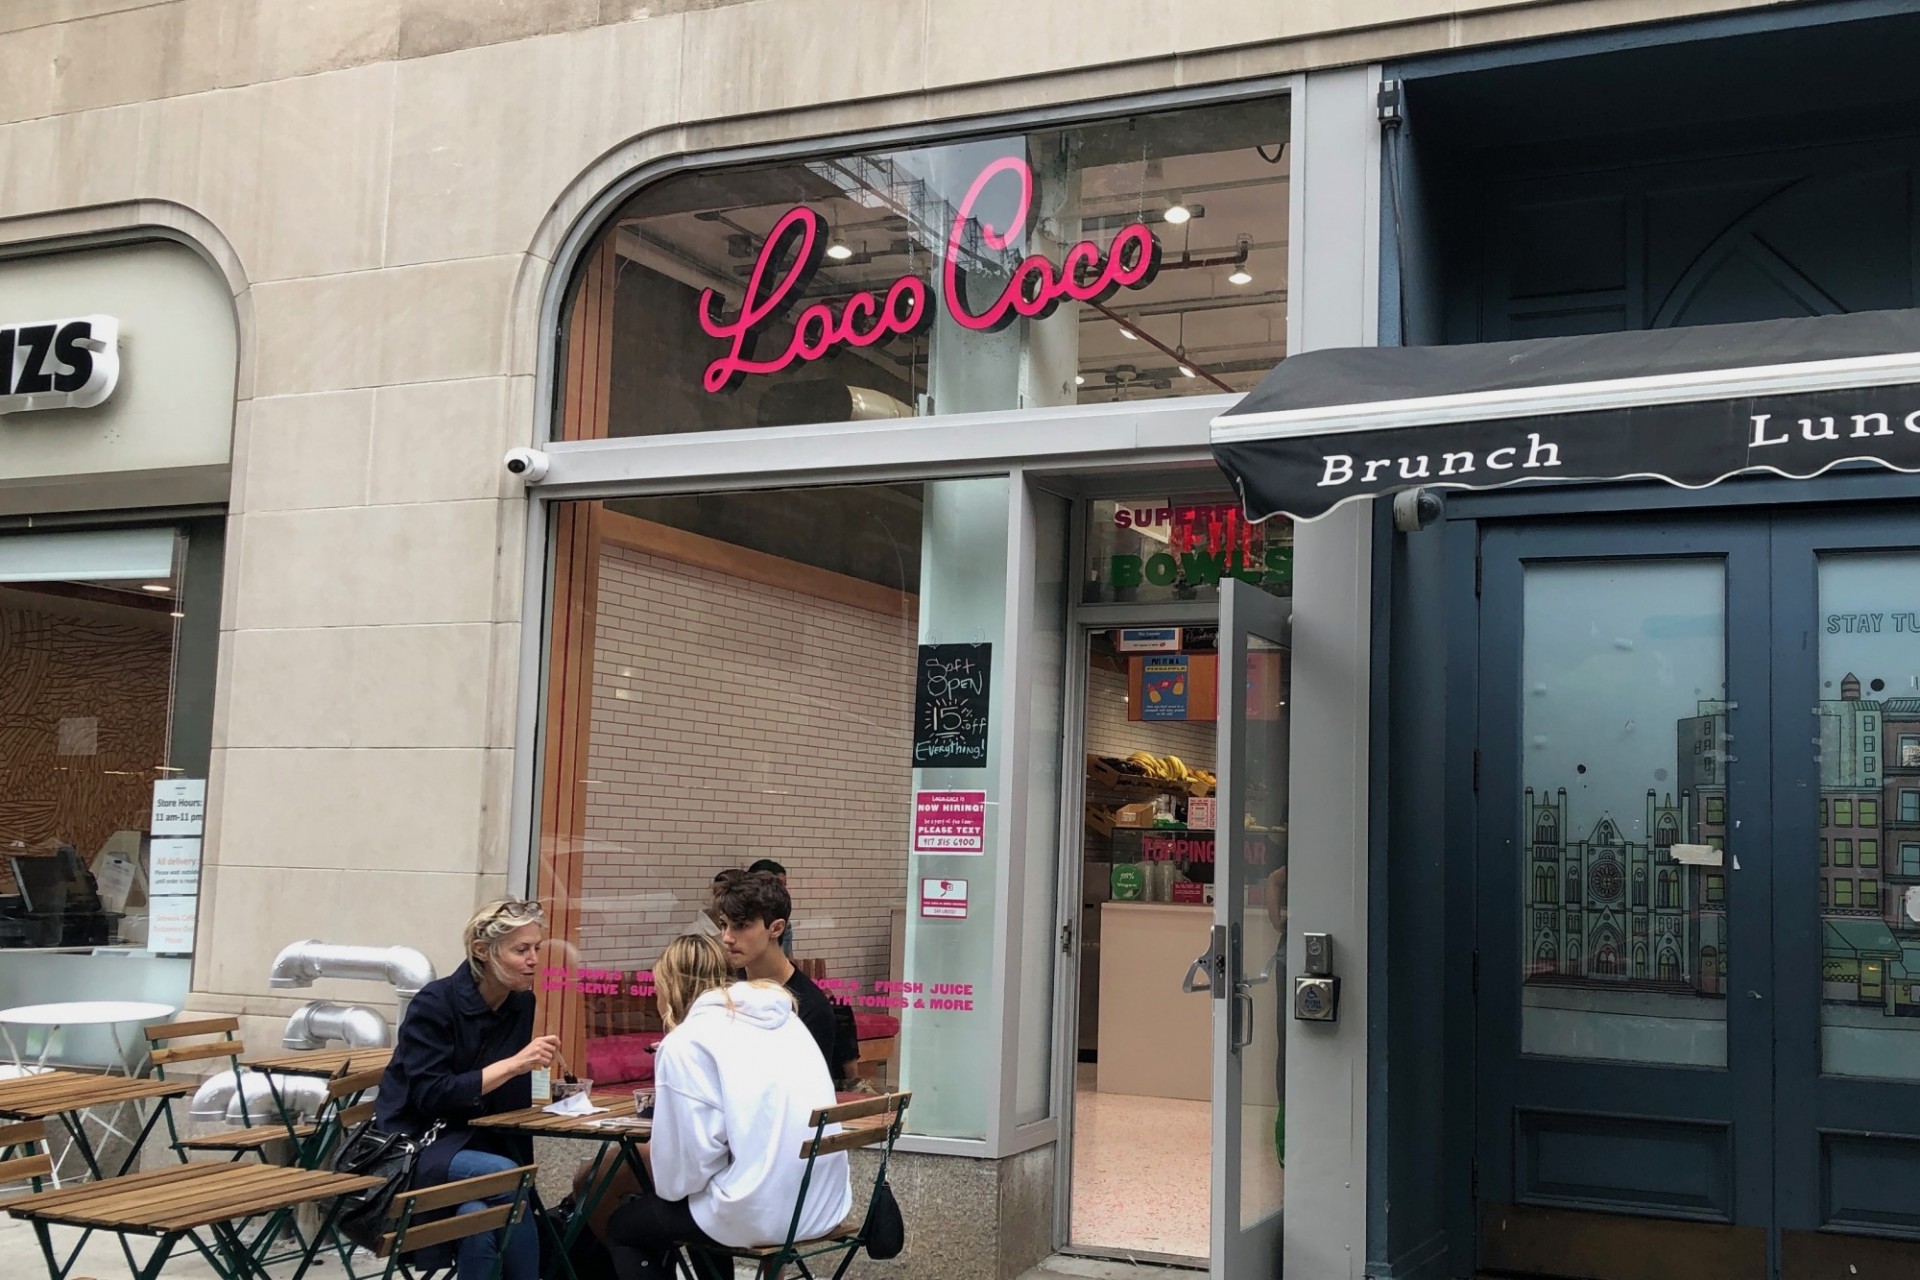 The storefront of Loco Coco, which has a party of three sitting at a table outside.